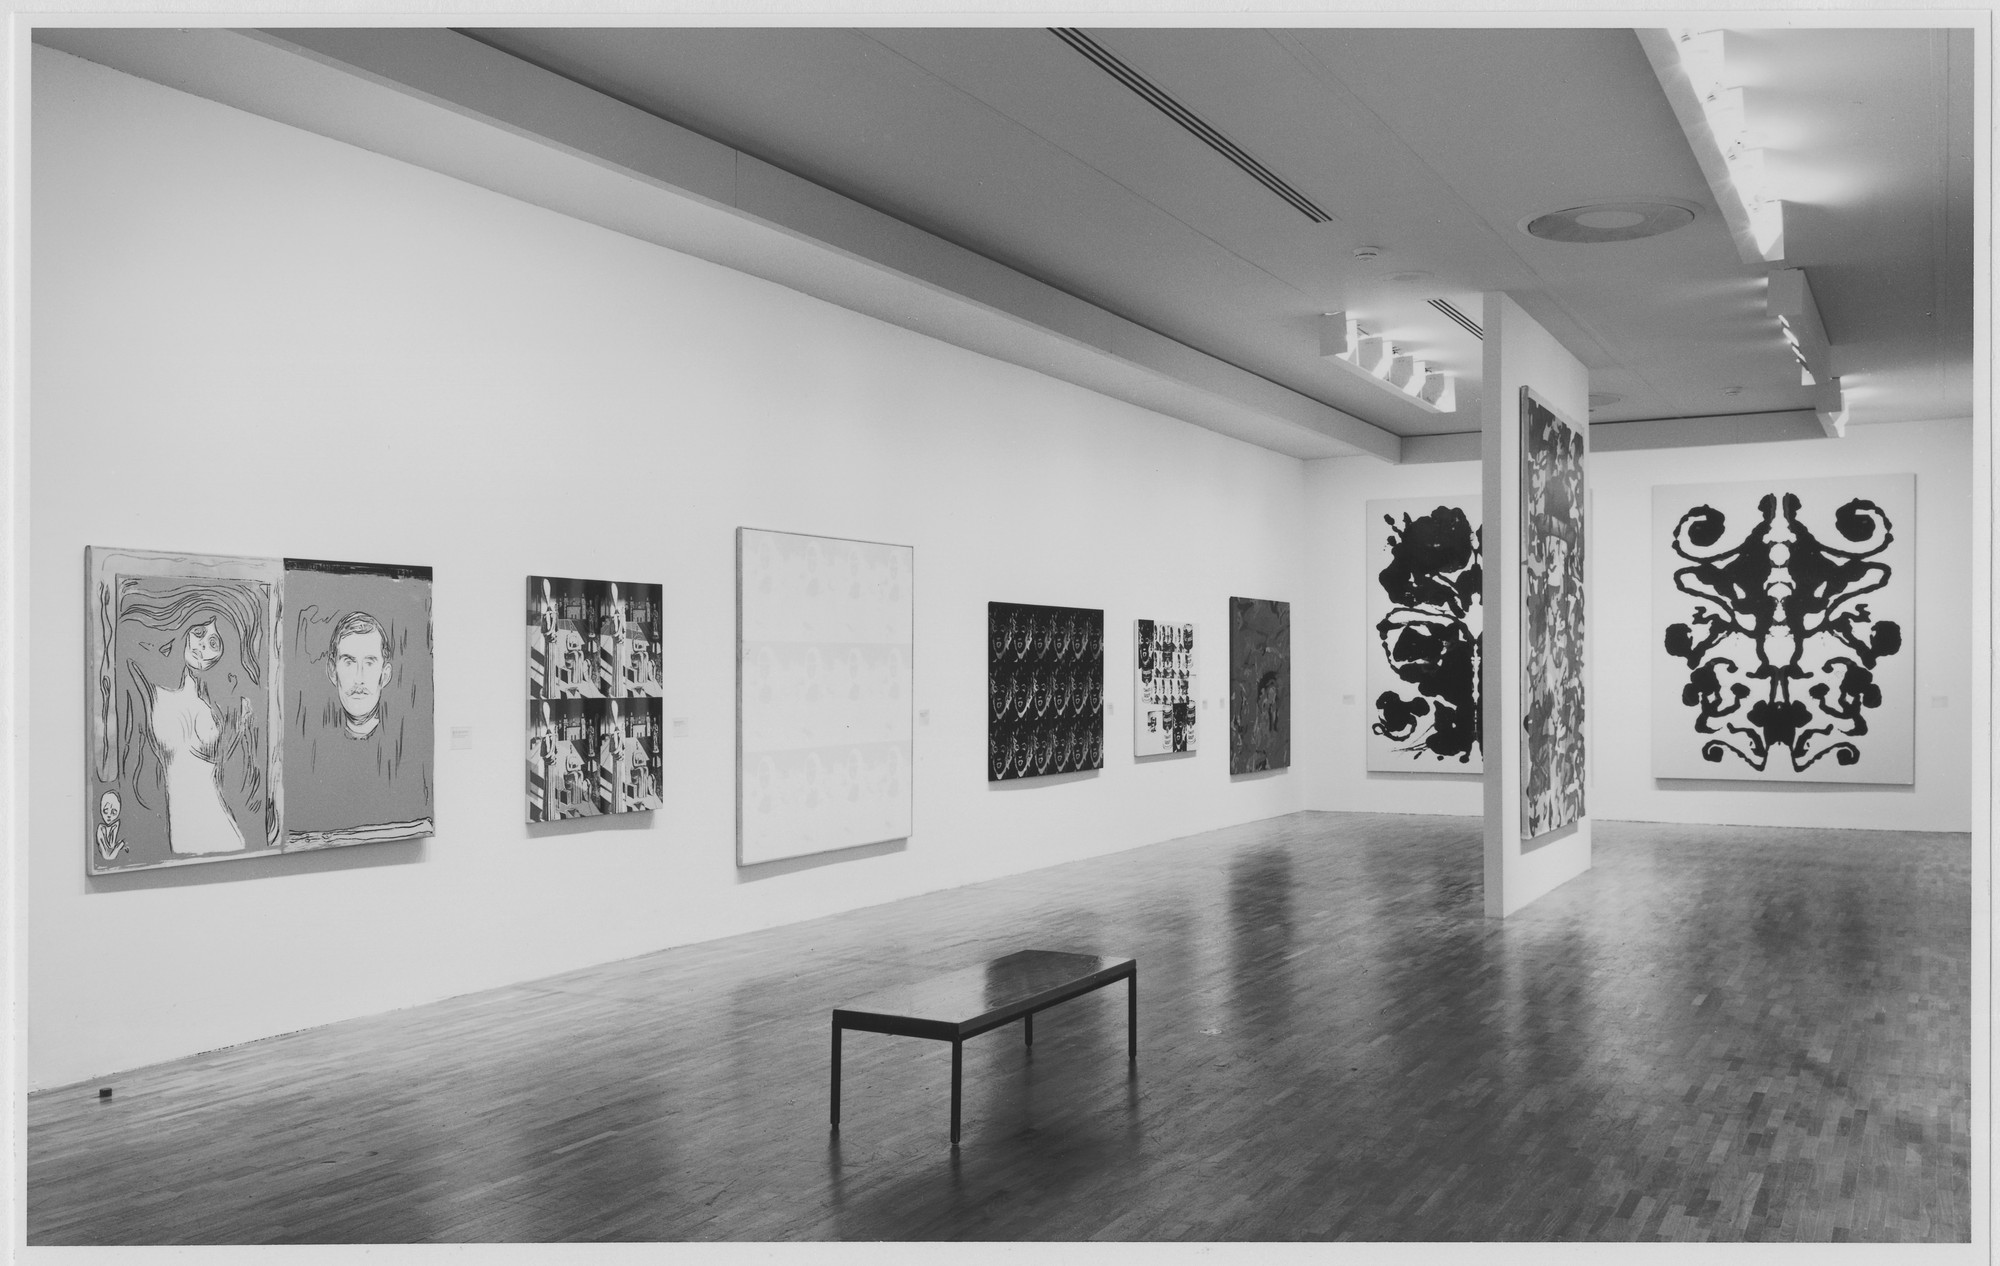 Installation view of the exhibition "Andy Warhol A Retrospective" MoMA